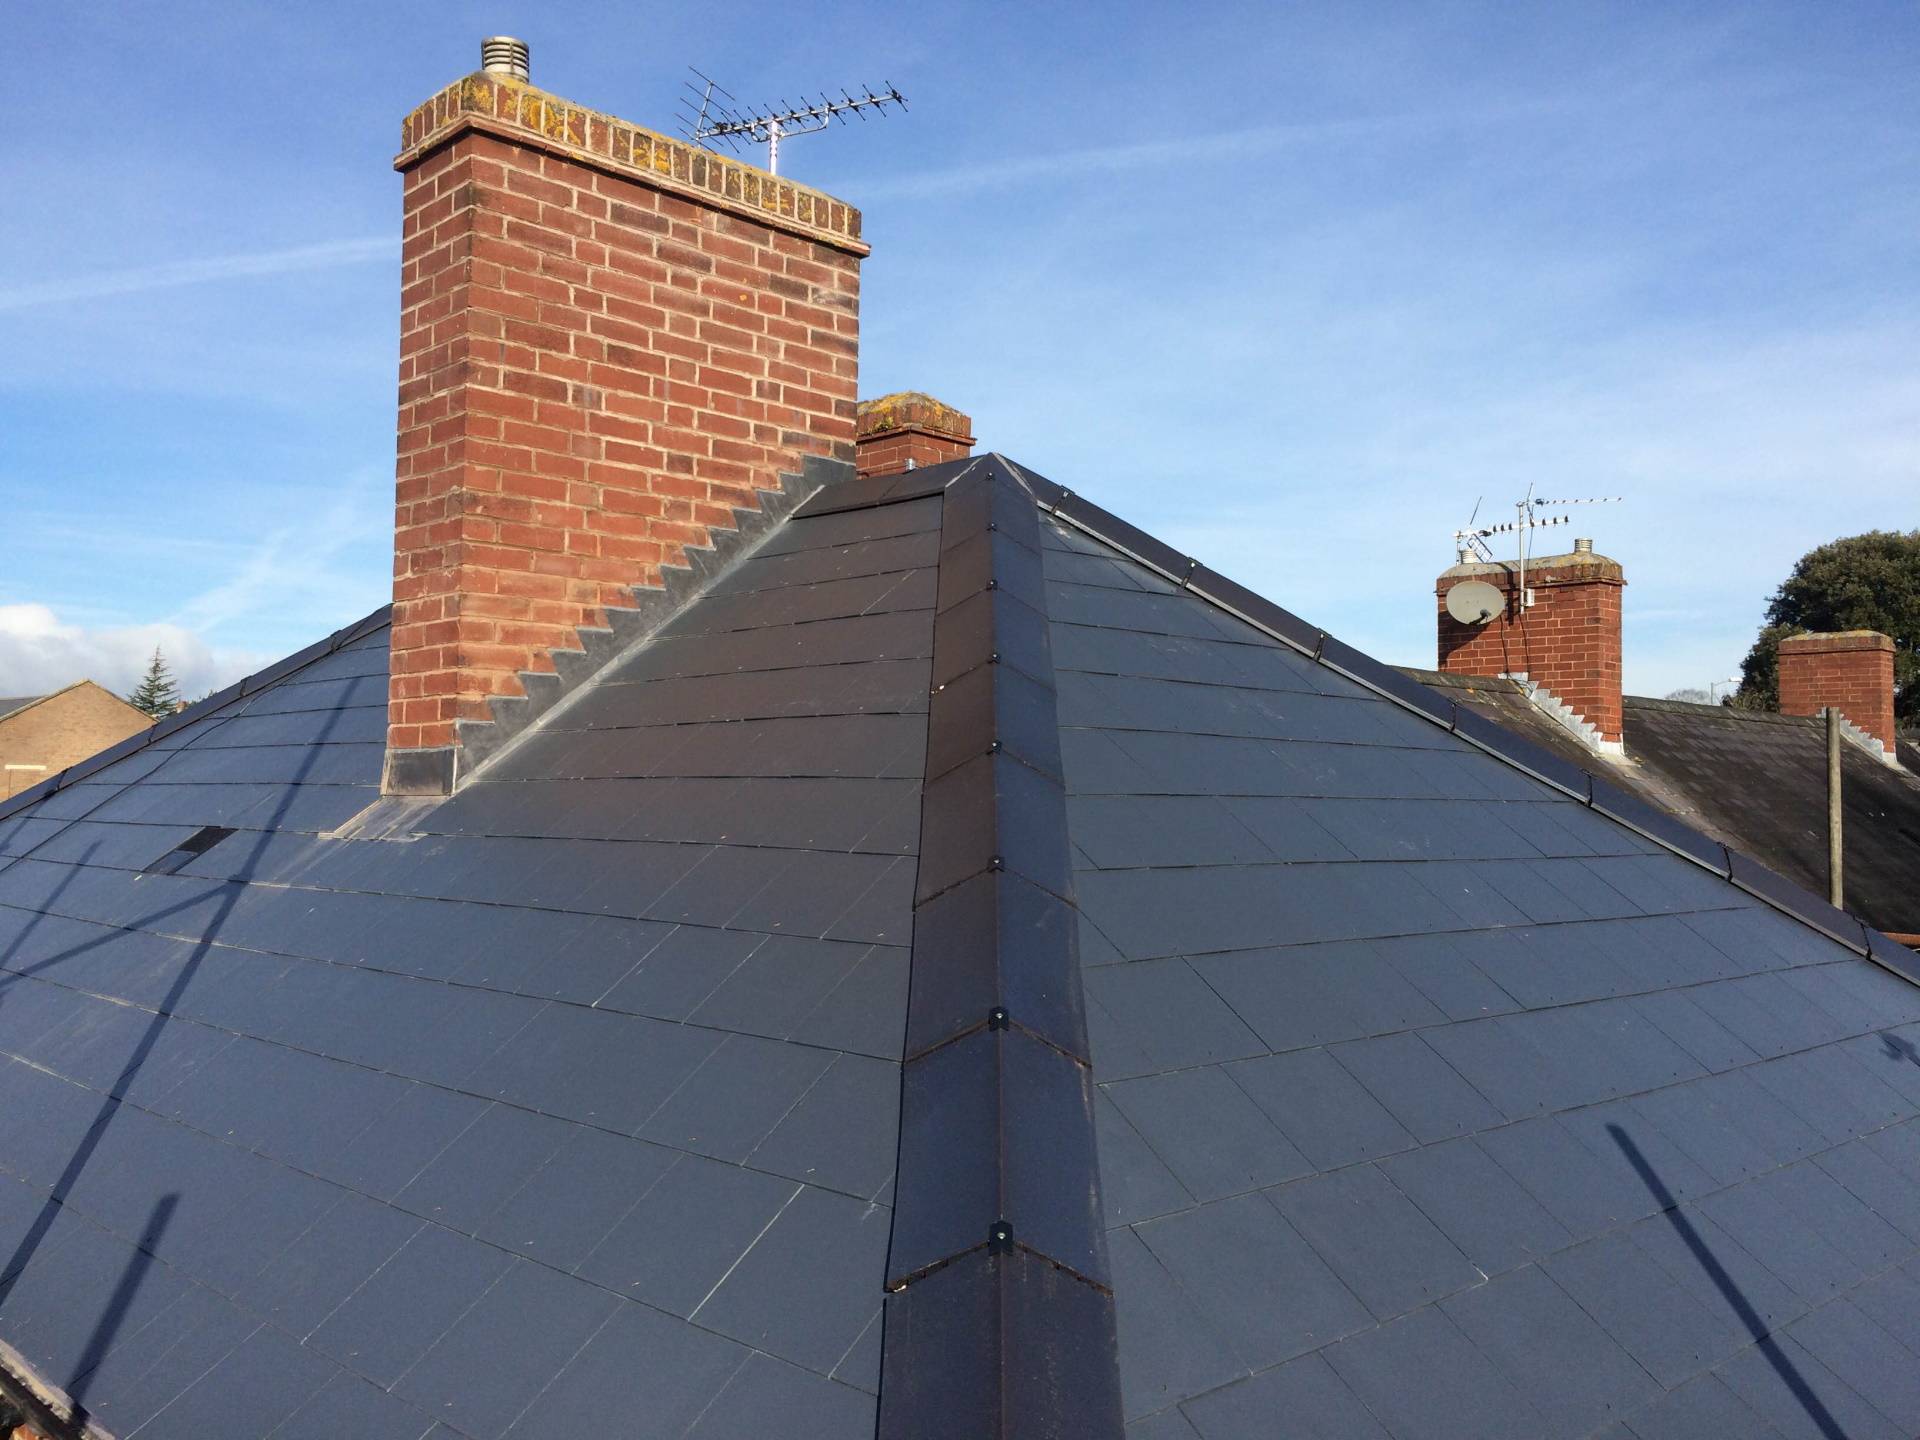 New roof tiles fitted to house